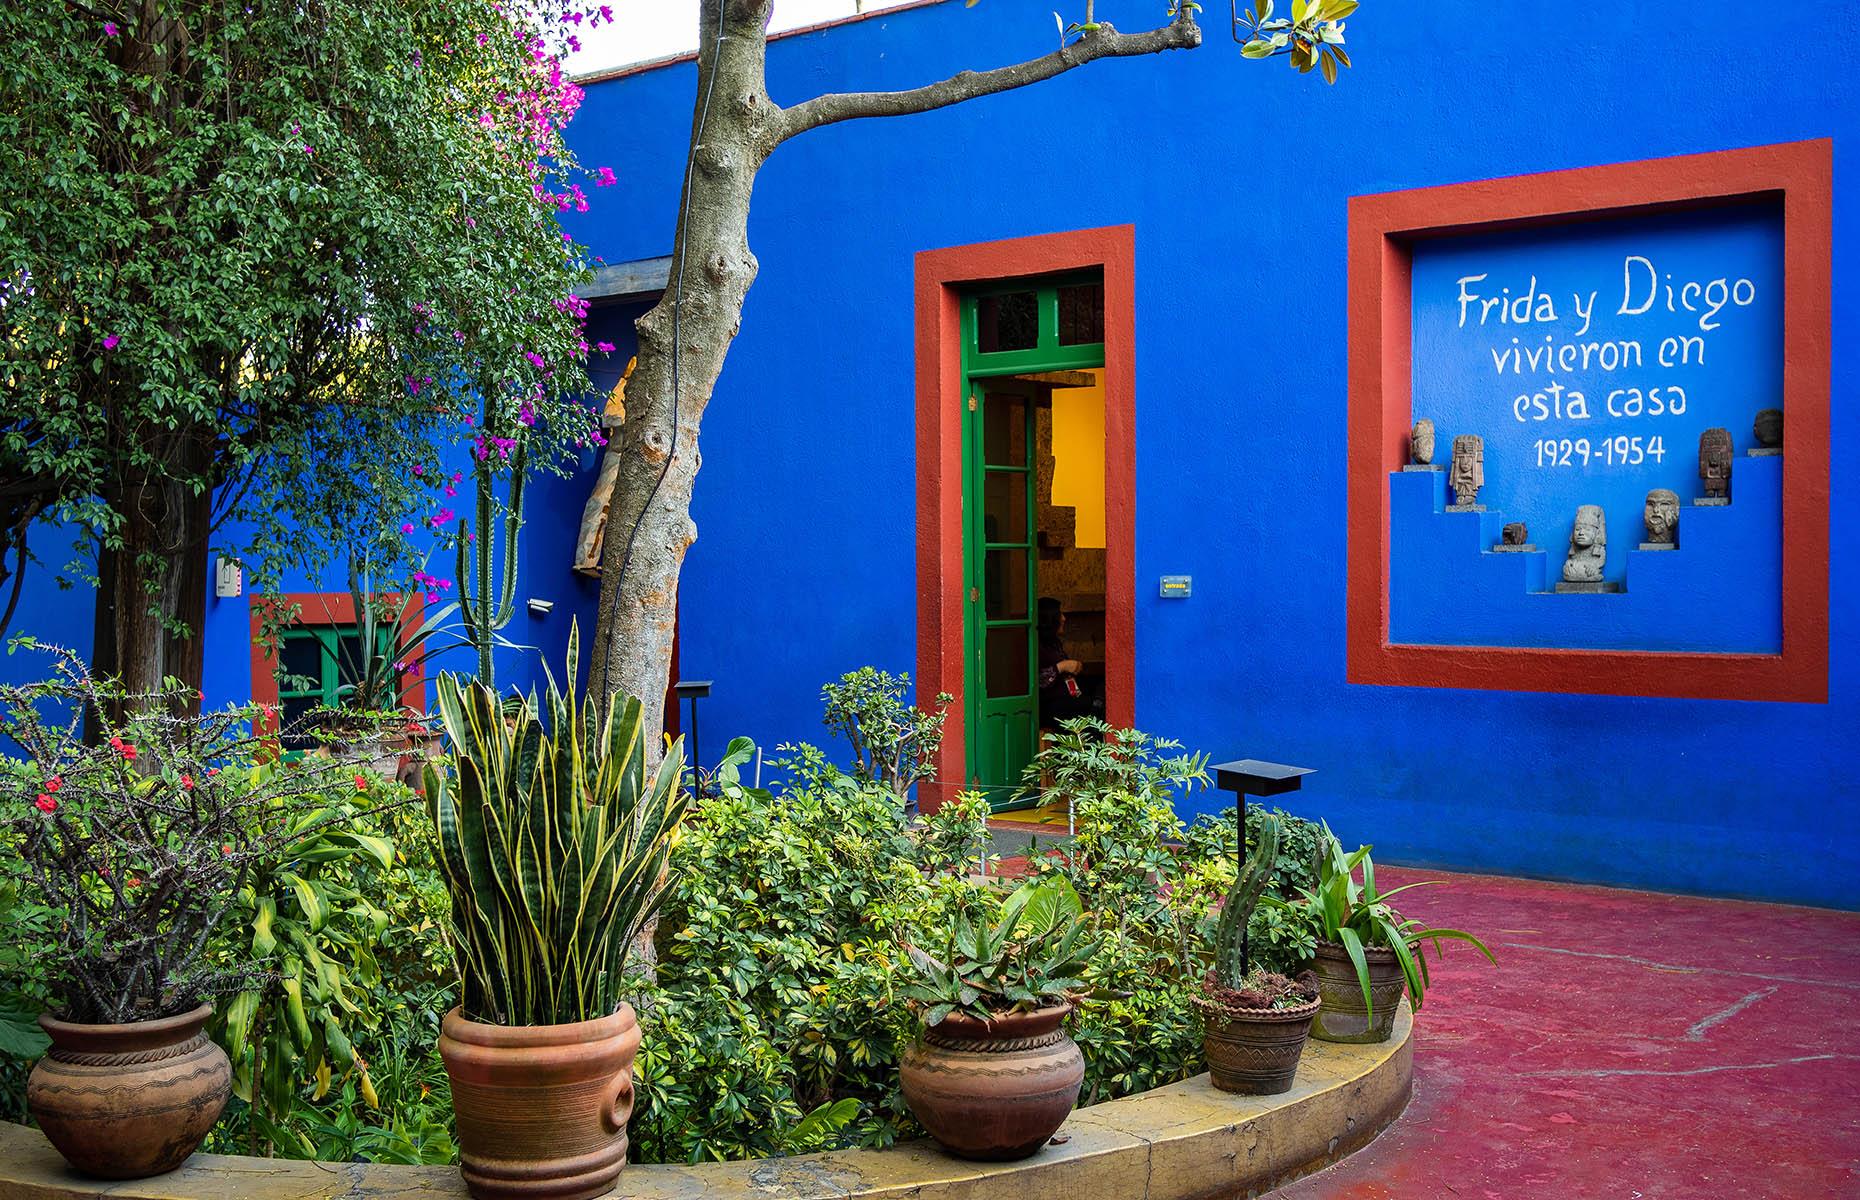 <p>One of the best cities in the world for culture, there are new galleries, exhibitions and emerging art spaces opening regularly in the Mexican metropolis. However, the Frida Kahlo Museum, aka the Blue House, in the Colonia del Carmen neighborhood of Coyoacan is still one of the main draws. Any local, or regular visitor, will tell you that the best time to go to Mexico City is between March and May when the city’s parks are in full bloom, and people are out and about enjoying the warm days and cool nights.</p>